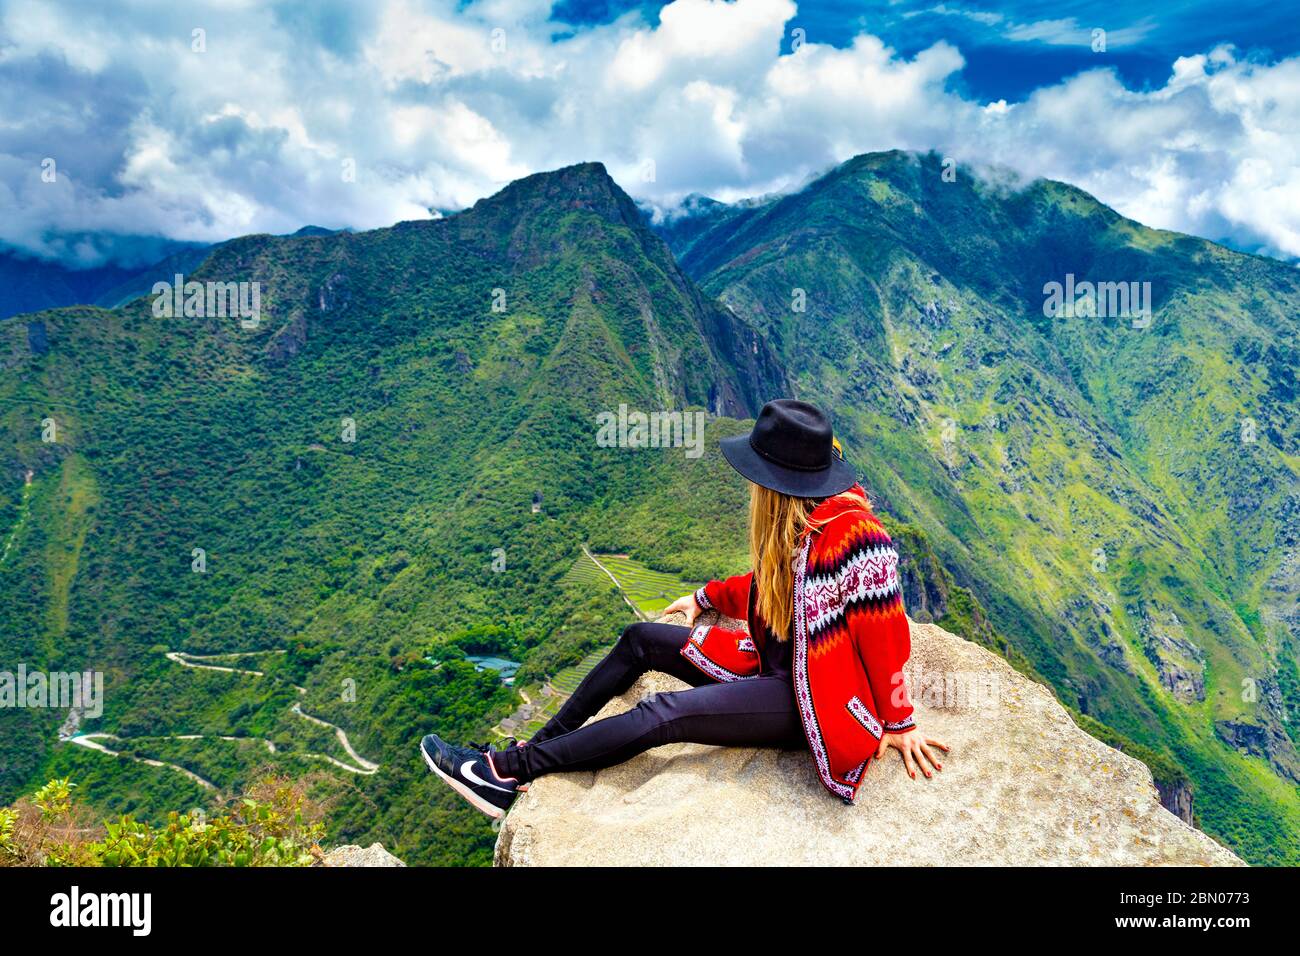 Girl sitting on the edge of a rock at the top of Huayna Picchu, scenic view over Machu Picchu and the Sacred Valley, Peru Stock Photo